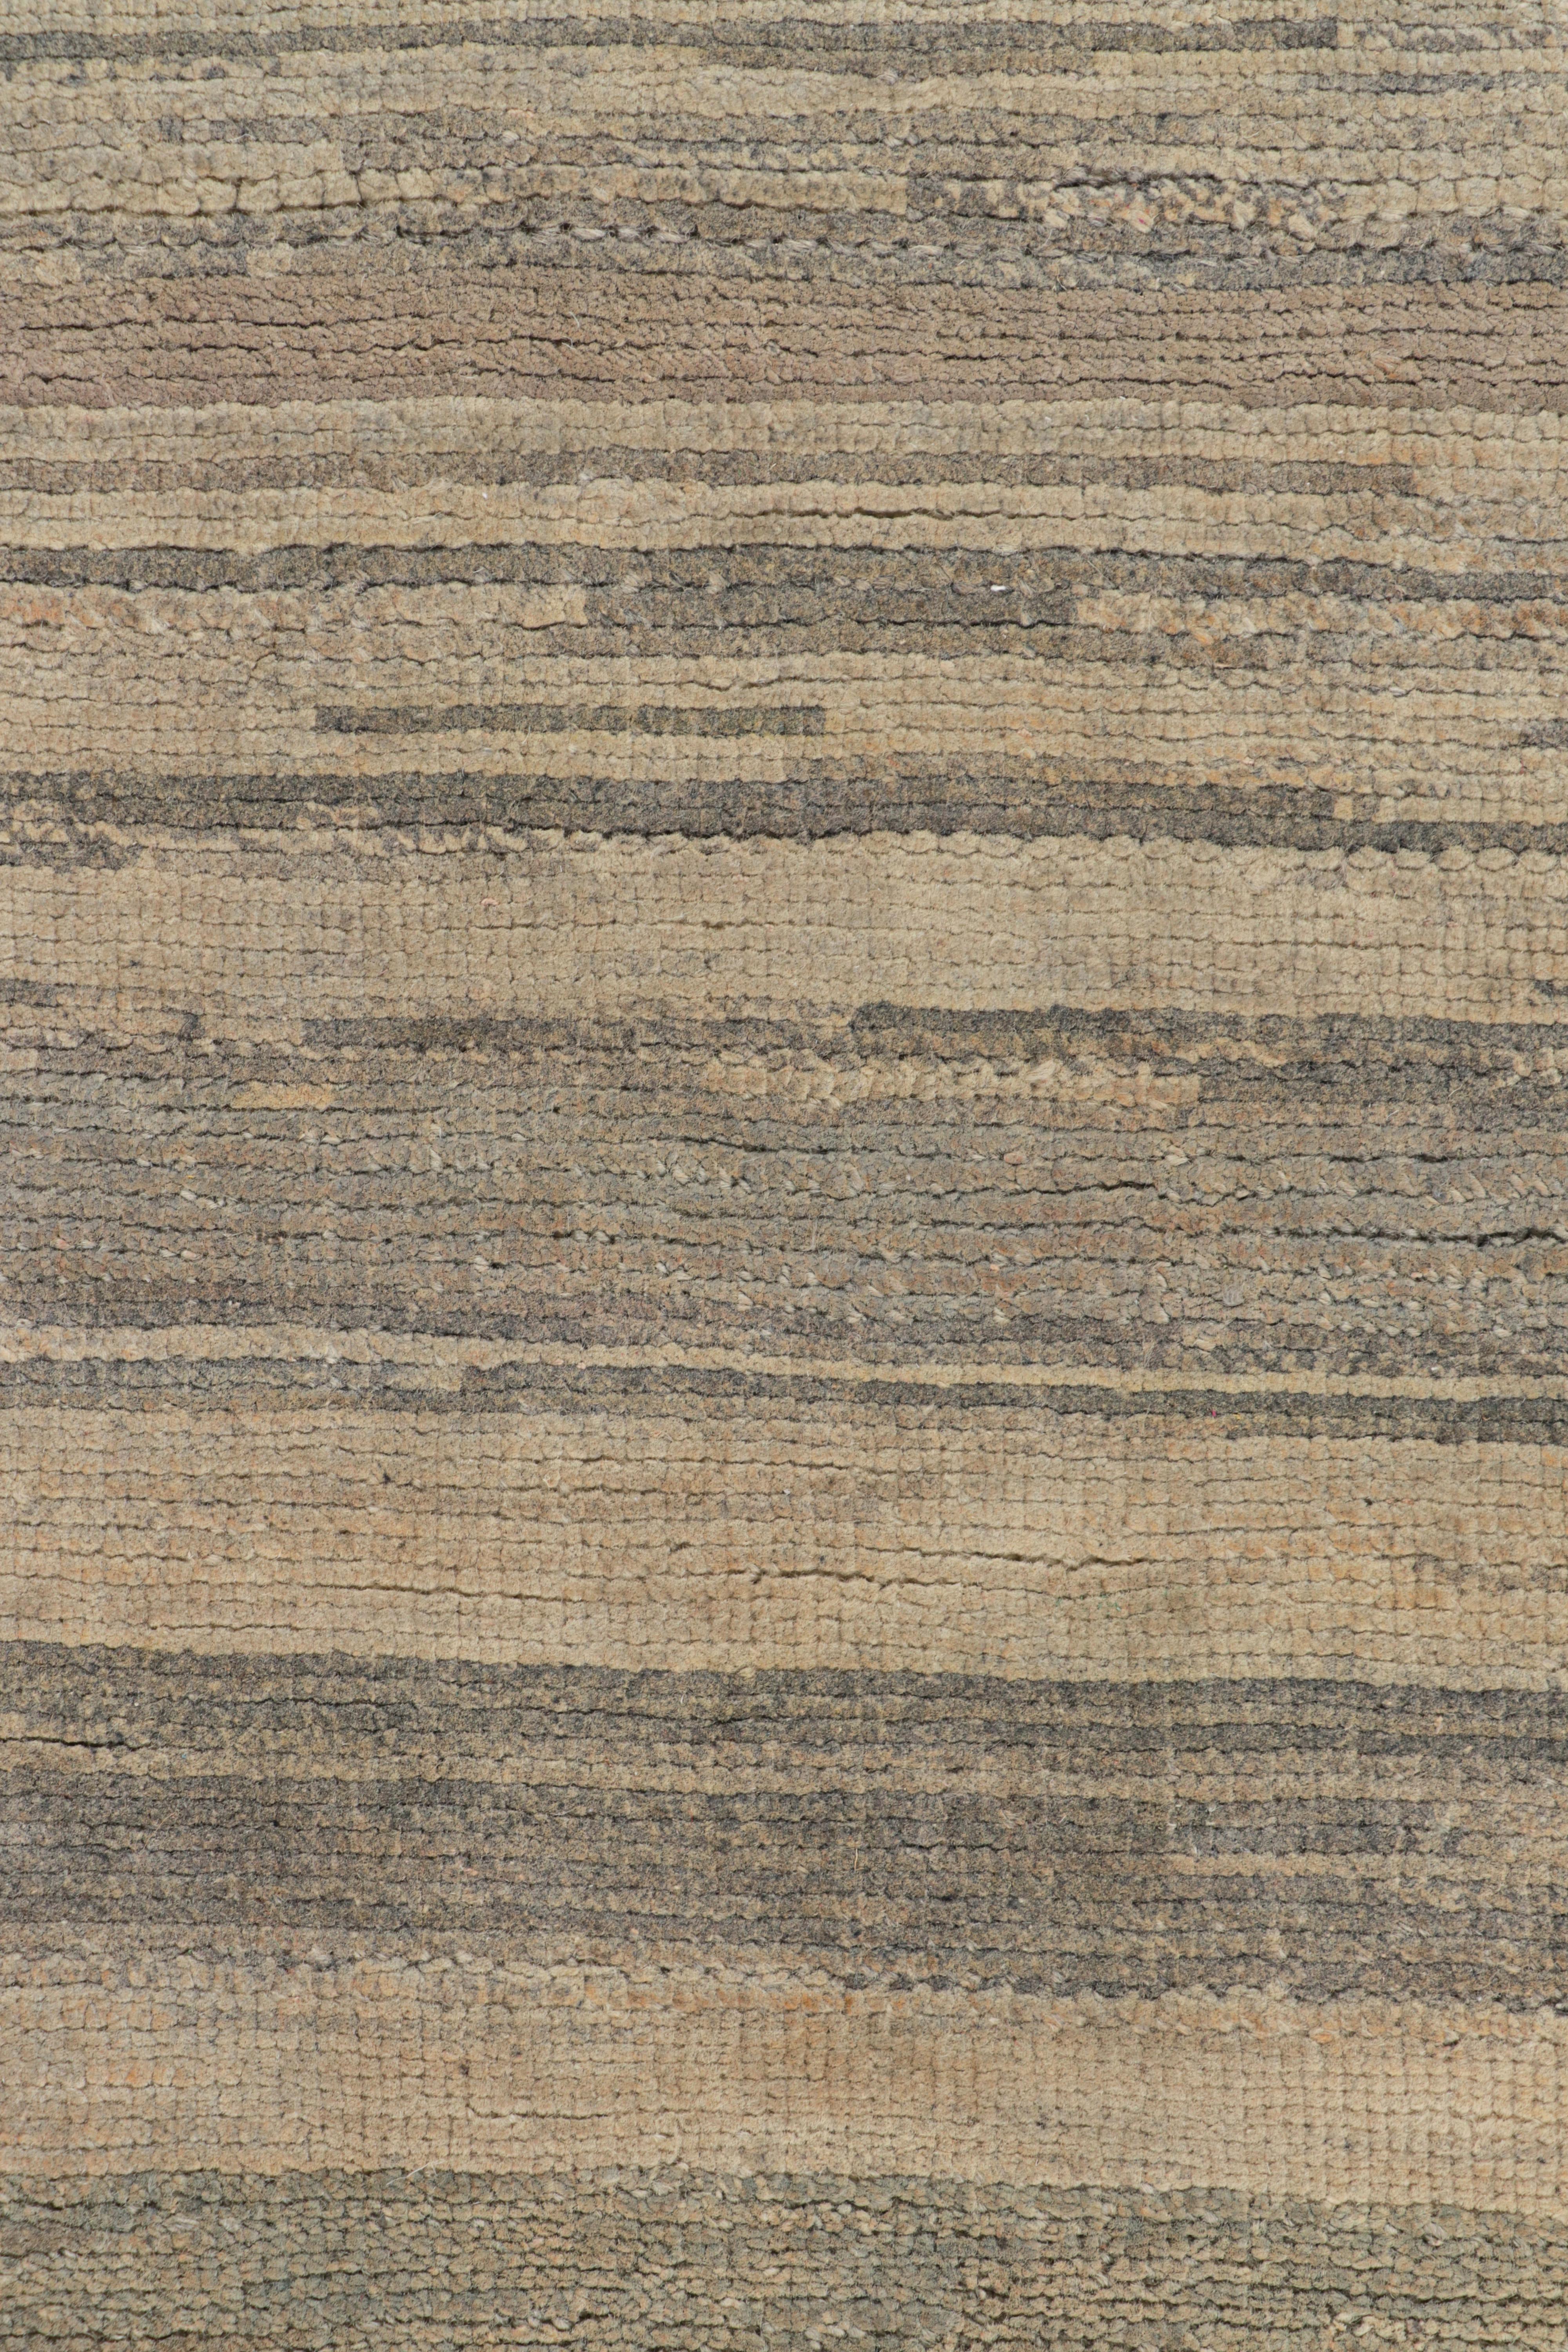 Indian Rug & Kilim’s Modern Textural Rug in Beige-Brown Geometric Stripes and Striae For Sale